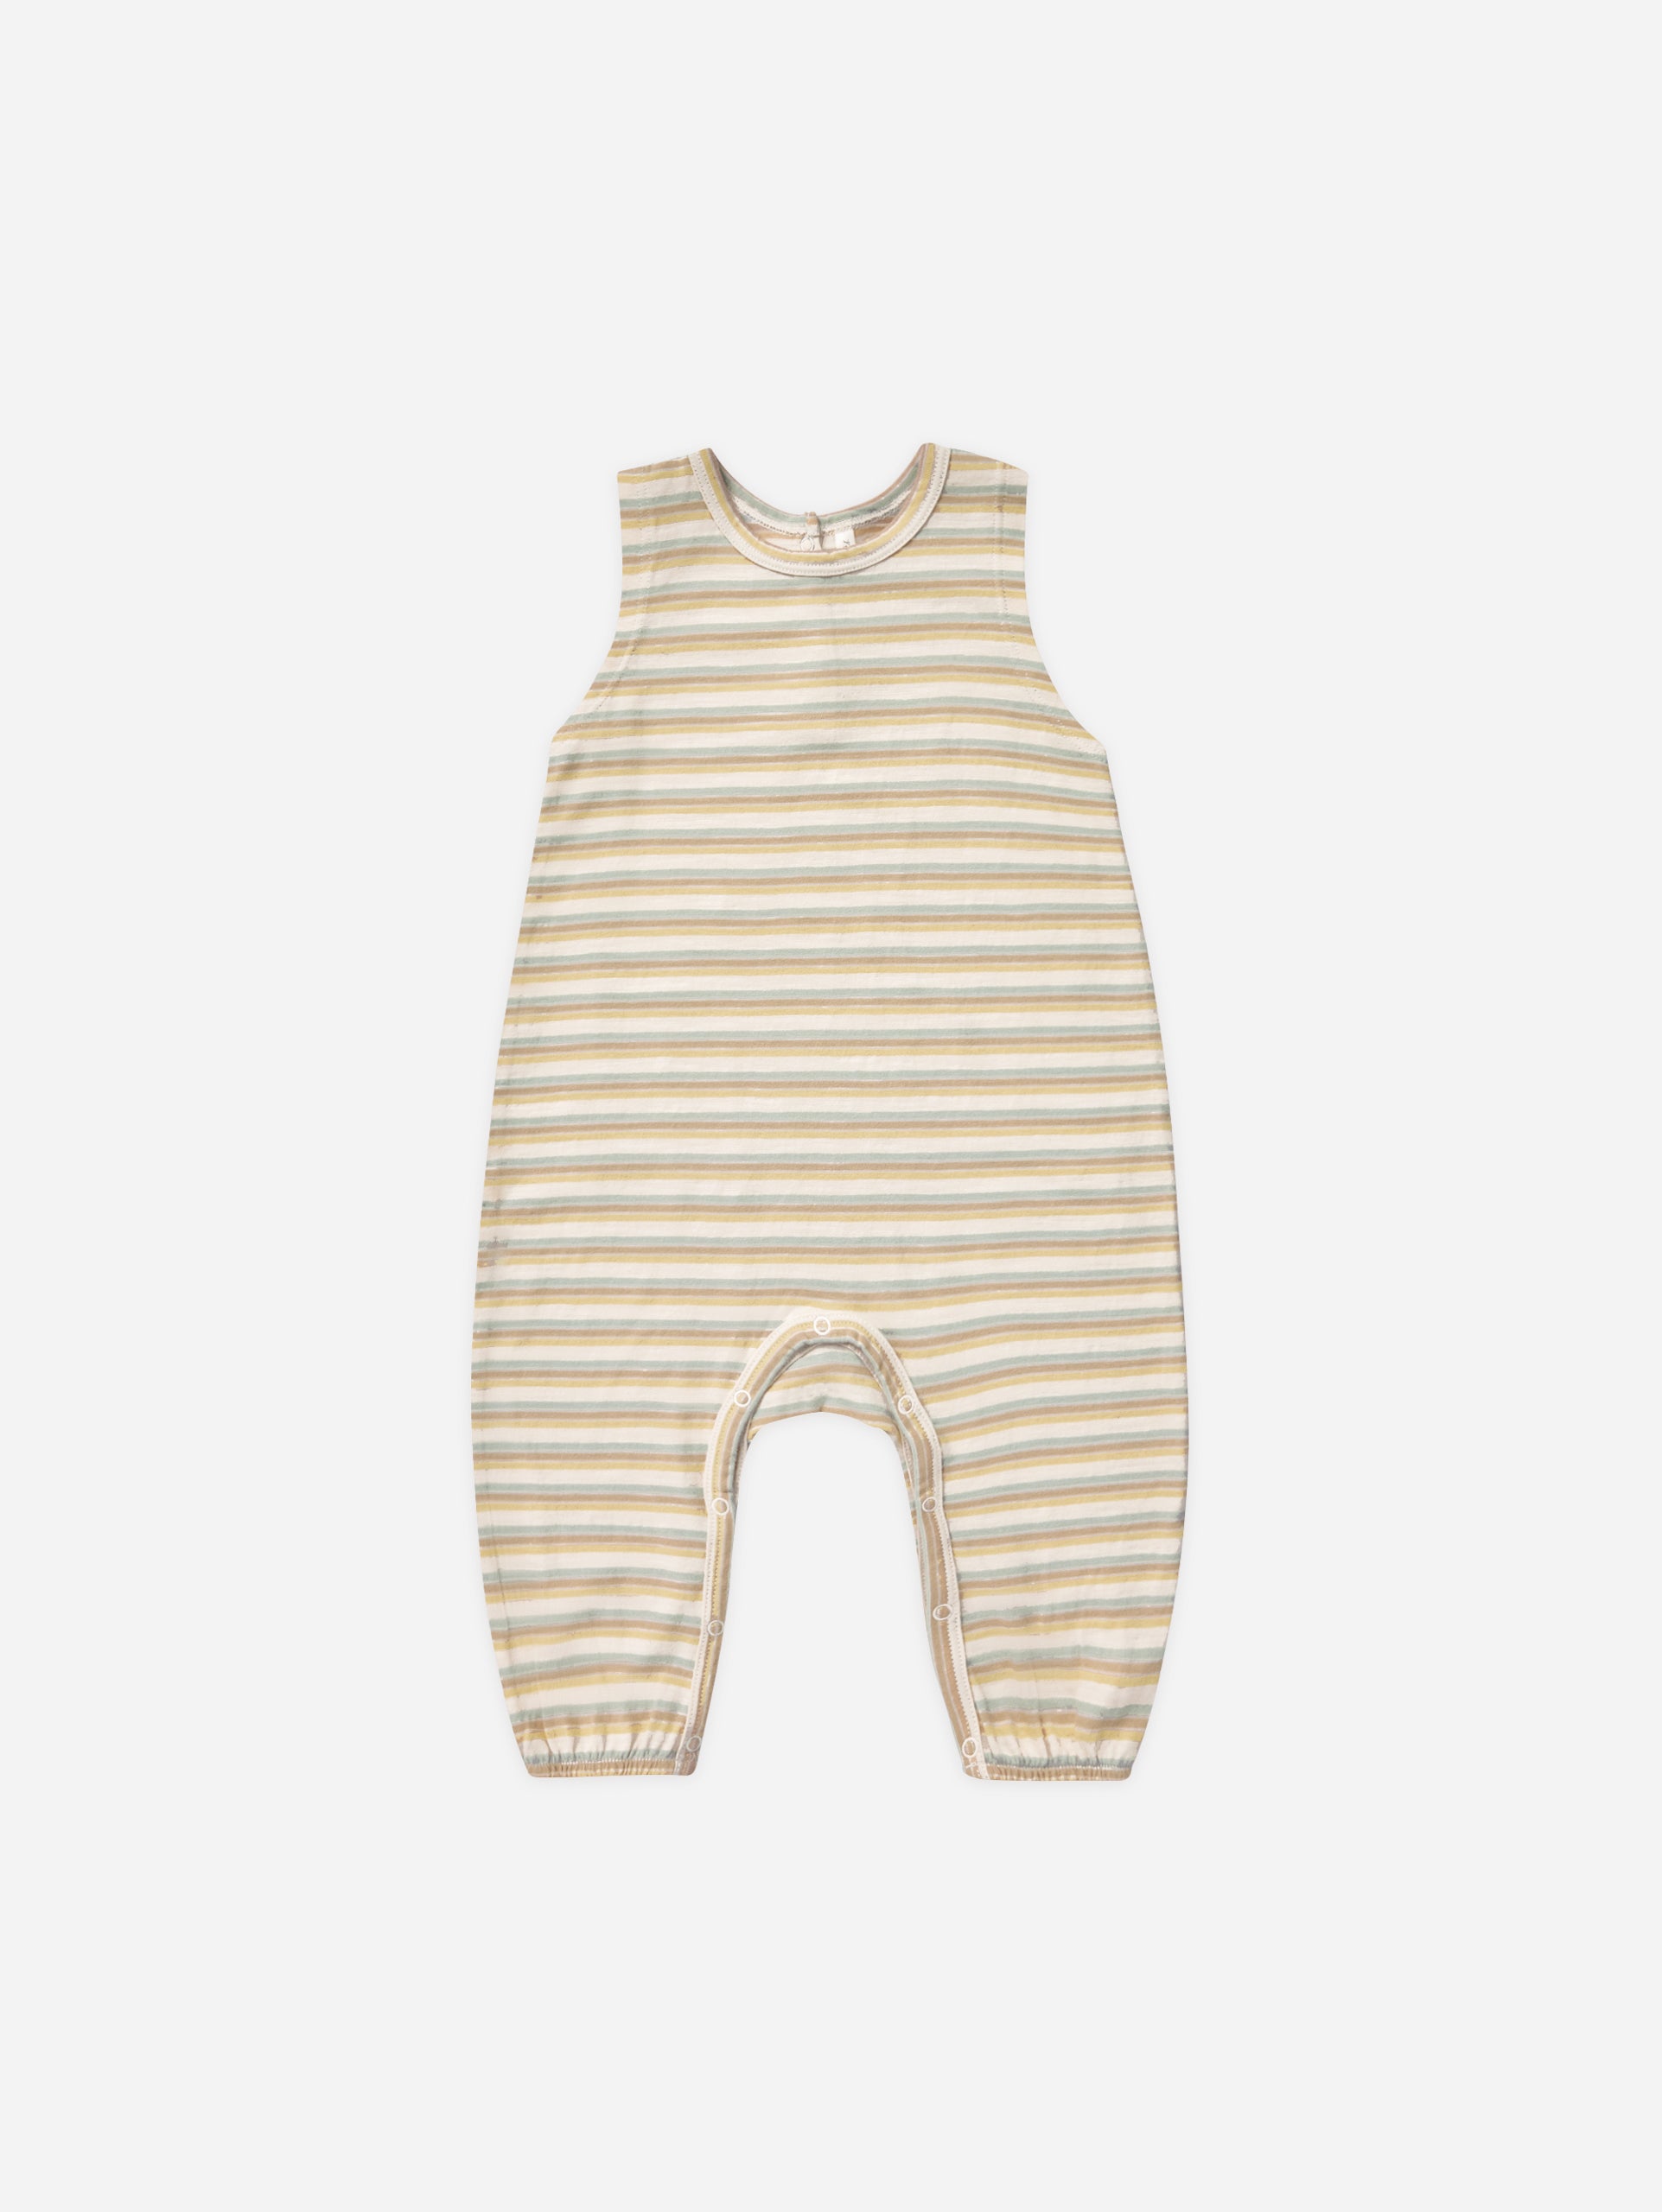 Mills Jumpsuit || Vintage Stripe - Rylee + Cru | Kids Clothes | Trendy Baby Clothes | Modern Infant Outfits |